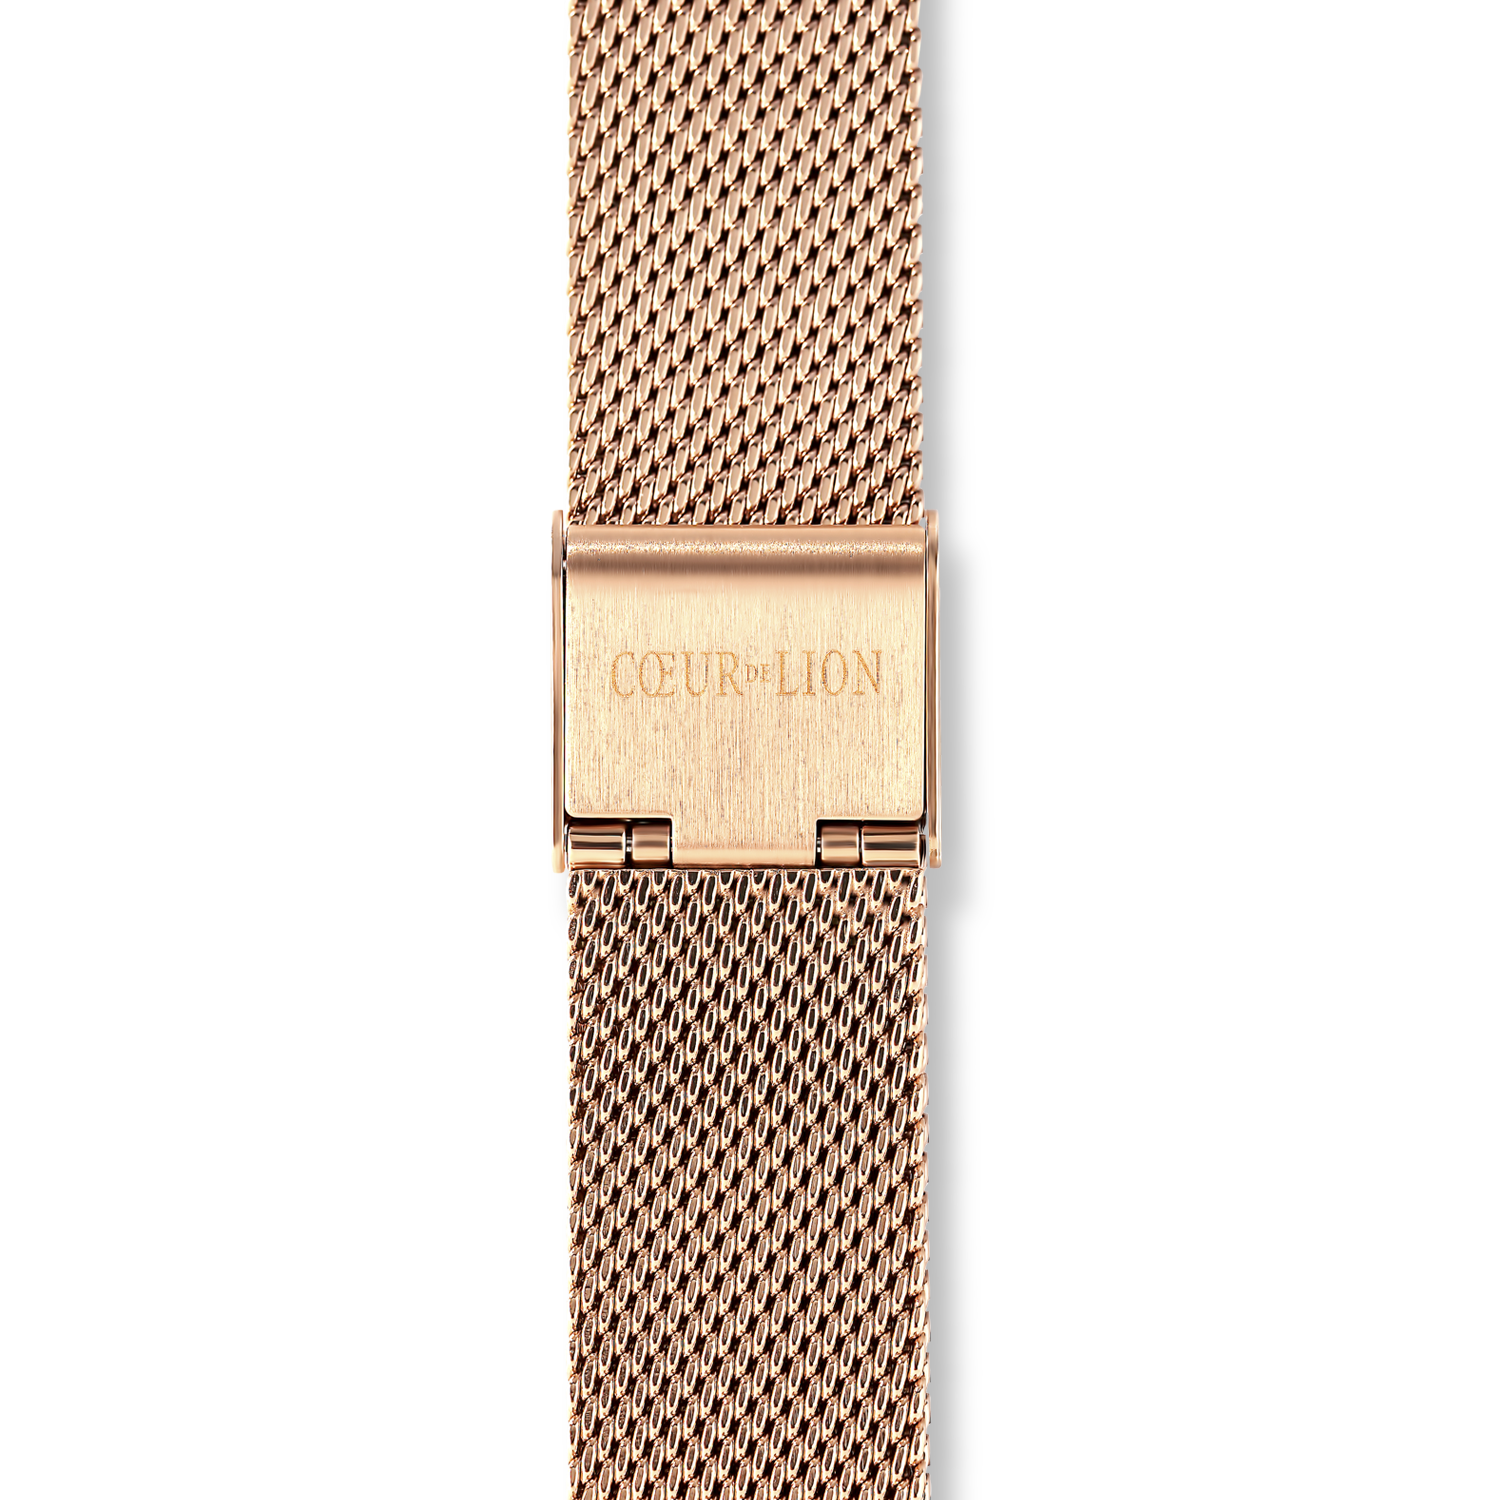 Watch Round Mocha Sunray Milanese Stainless Steel Rose Gold